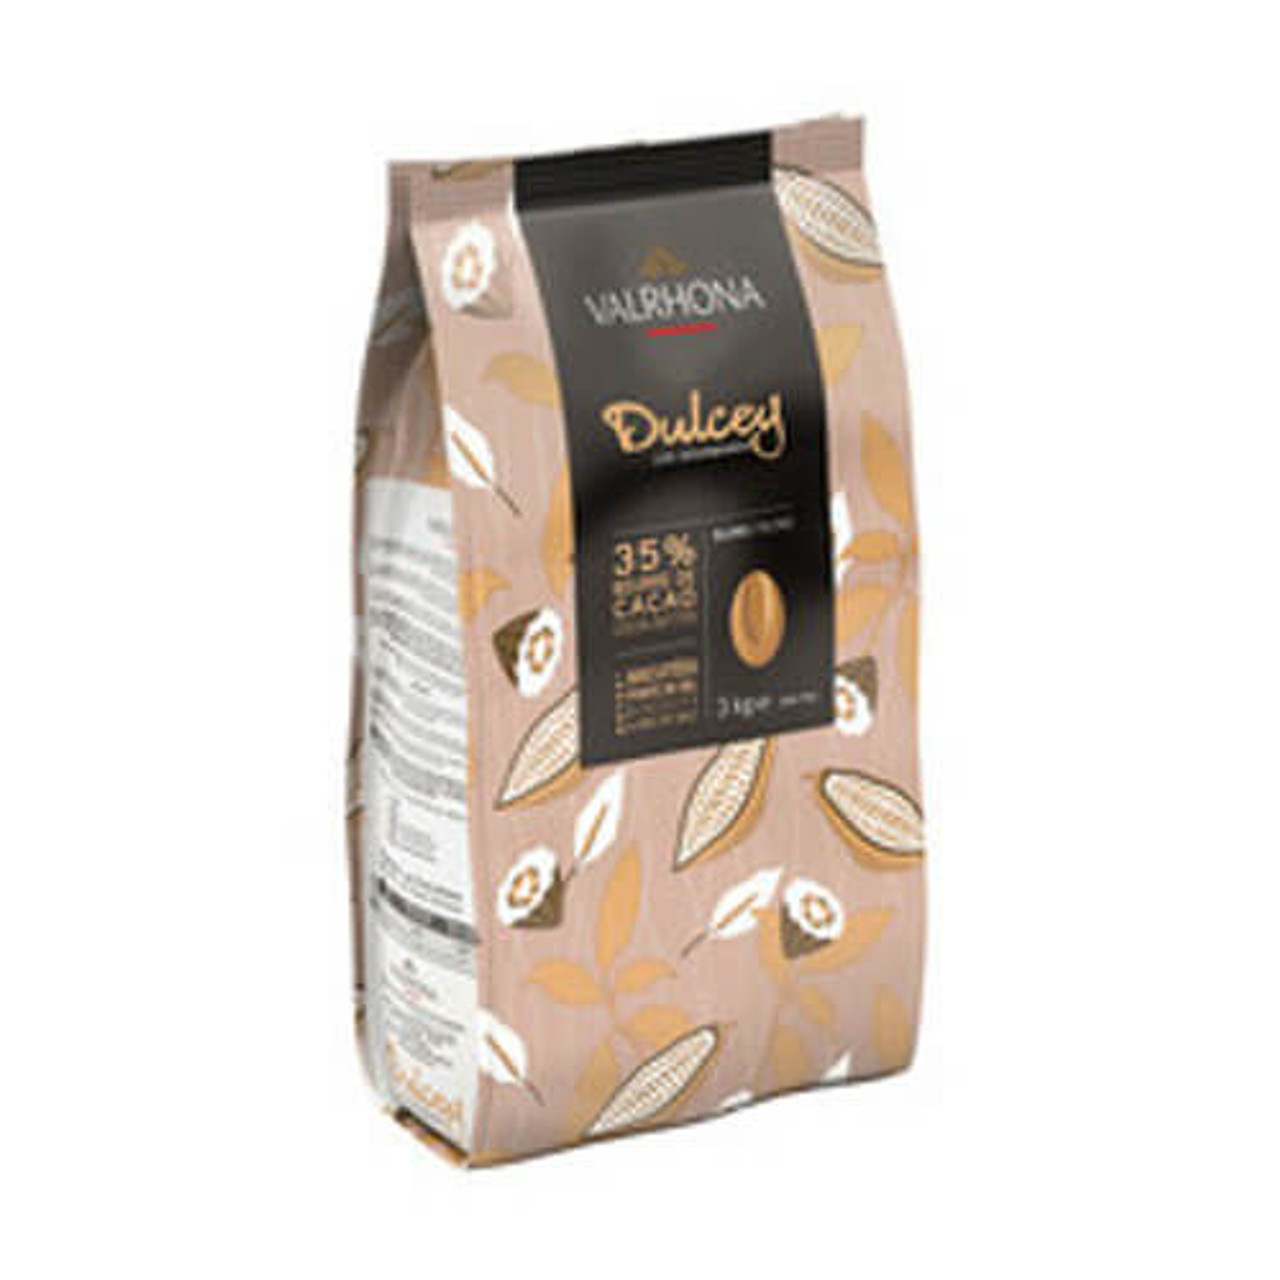 Valrhona Dulcey 35% Blond Chocolate Féve 6.6 lb. - Decadent Blond Chocolate for Culinary Creations